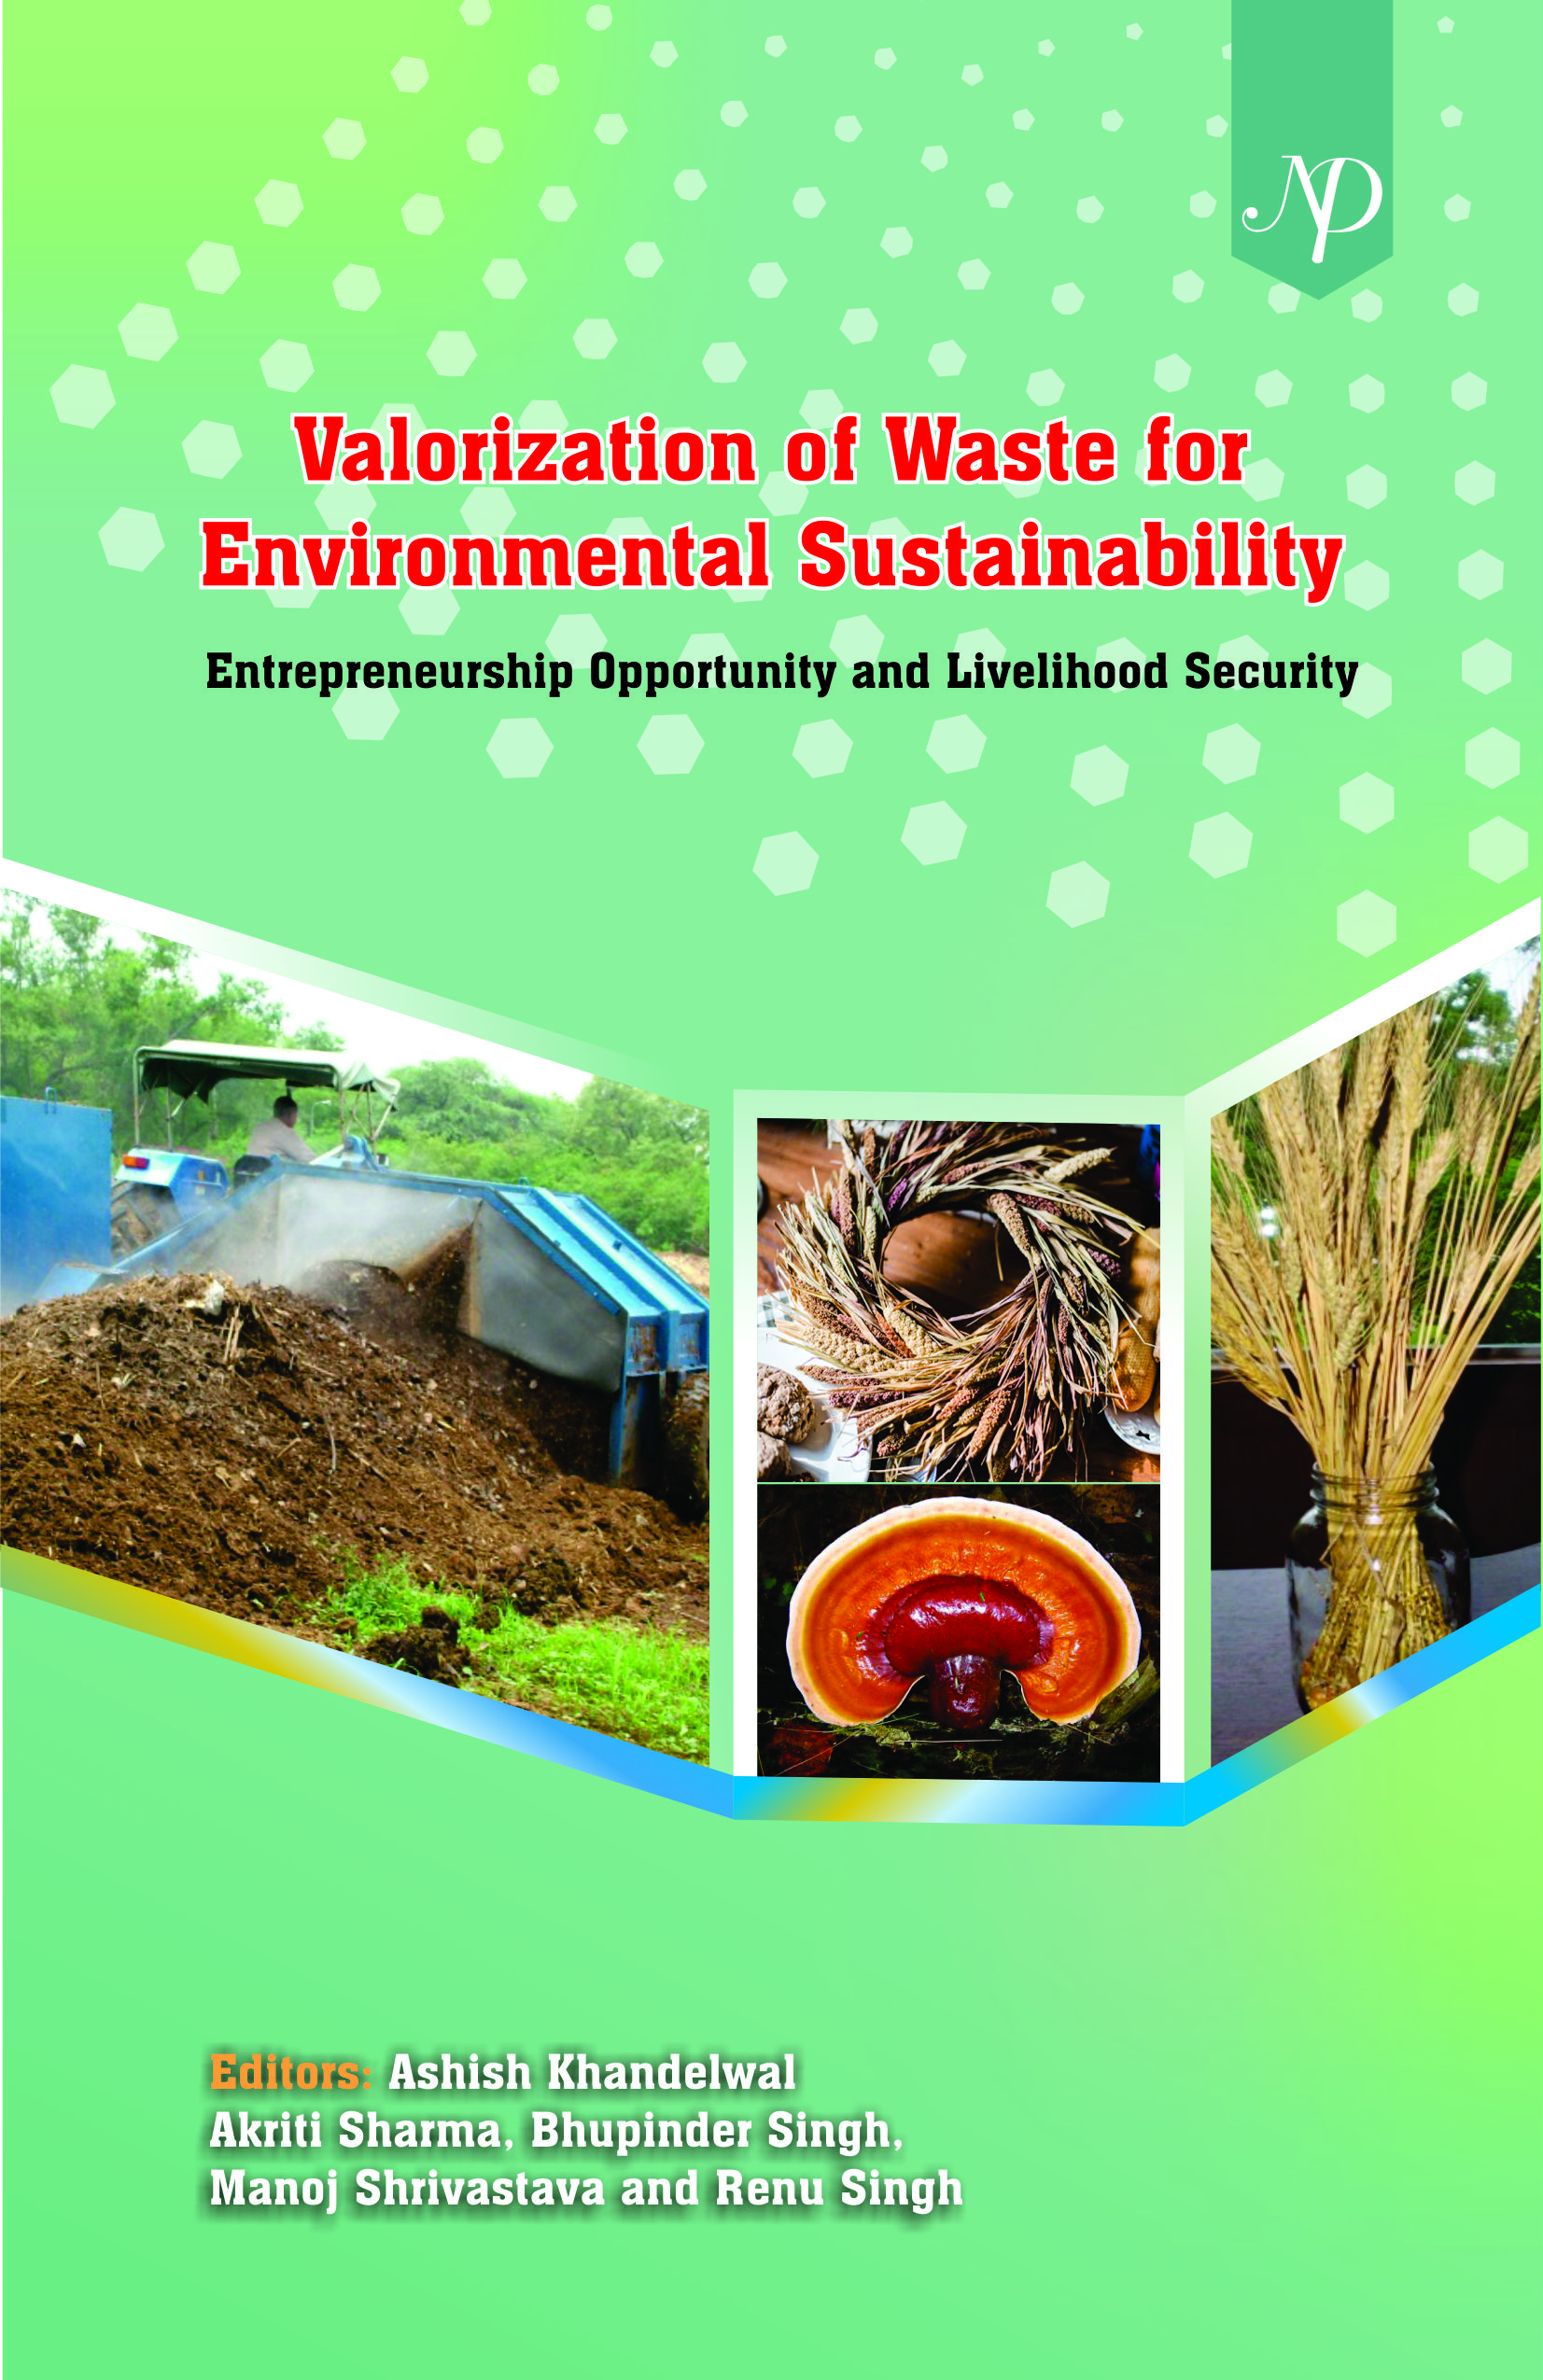 Valorization of waste for environmental sustainability Cover.jpg